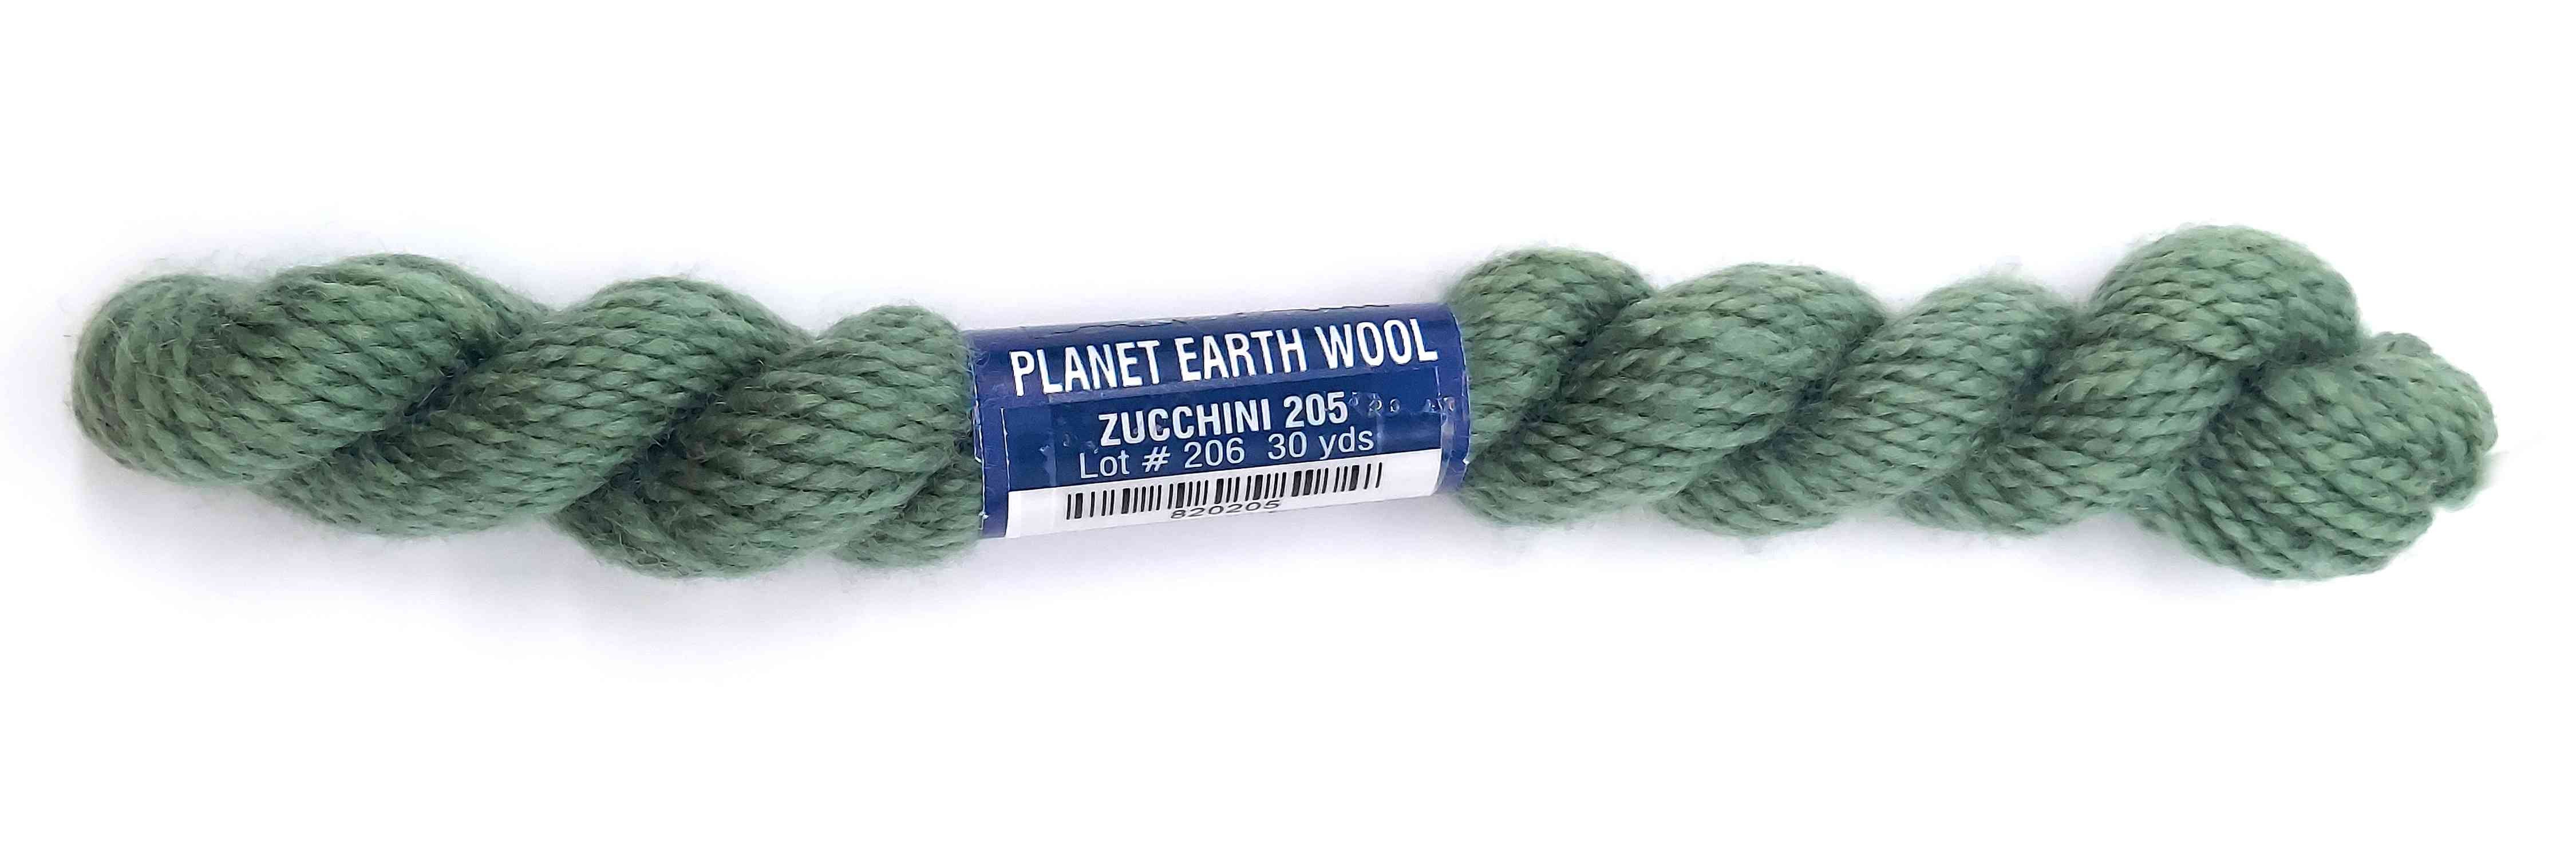 Planet Earth Wool 205 Zucchini - The Flying Needles